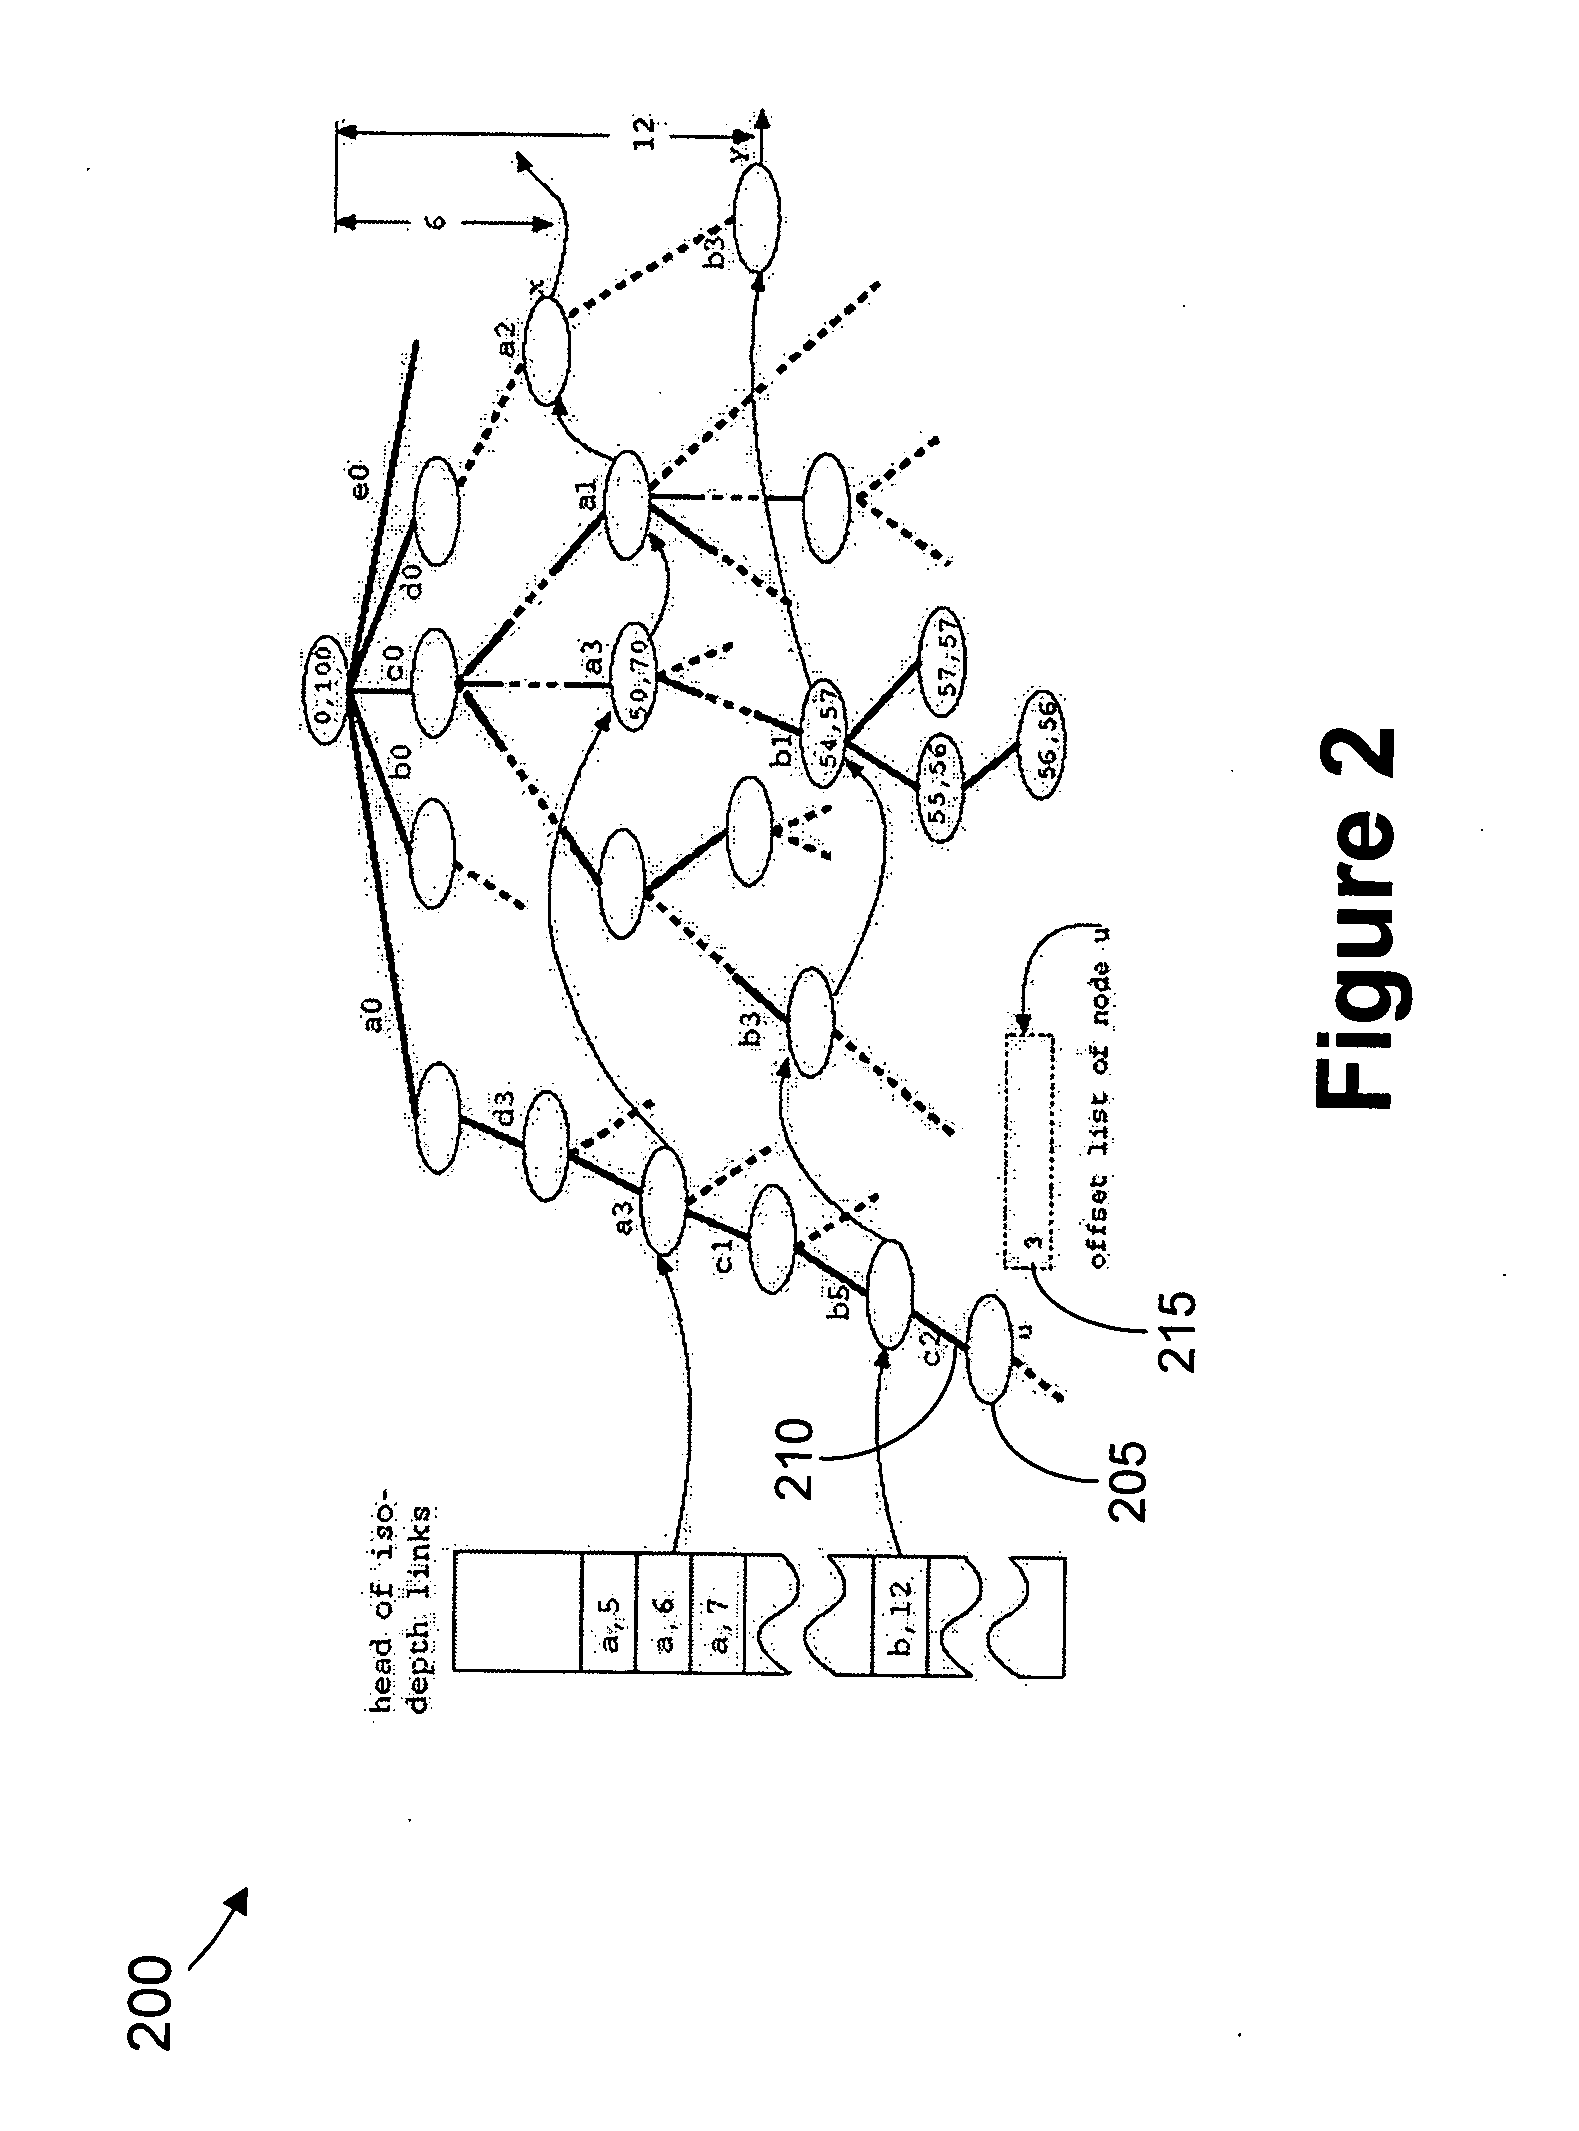 System and method for indexing weighted-sequences in large databases